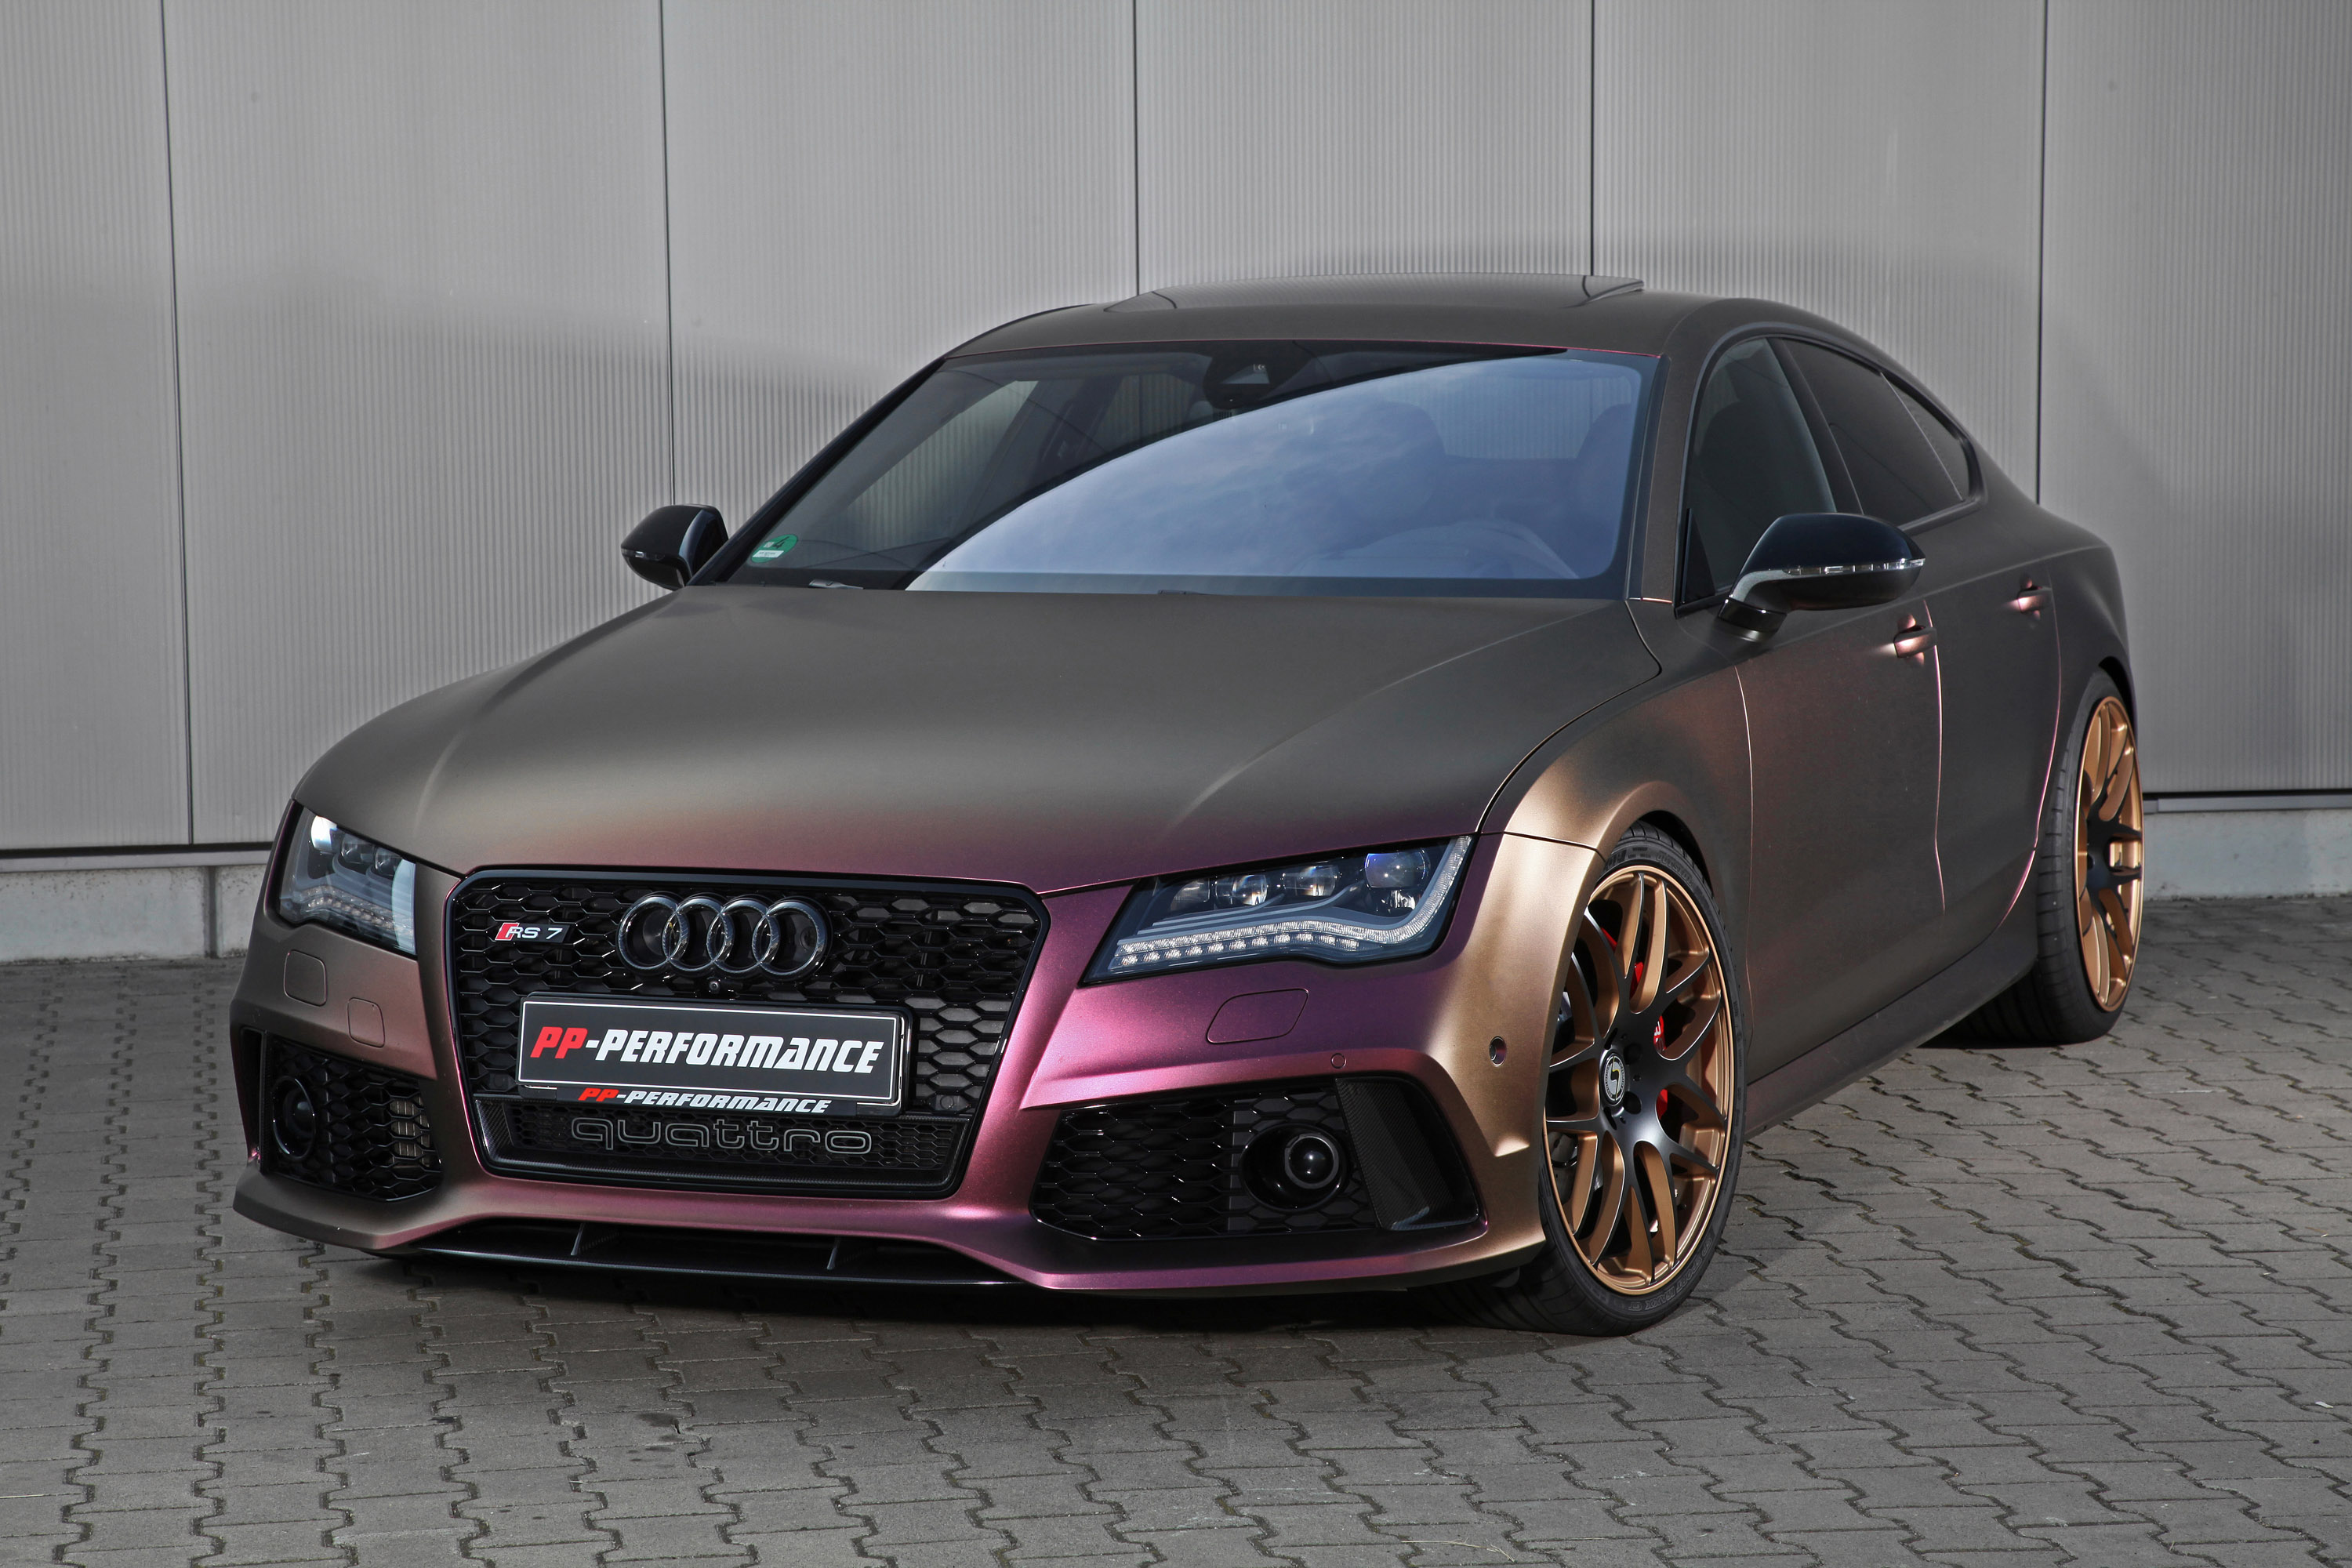 PP Performance reveals a special and redesigned Audi RS7